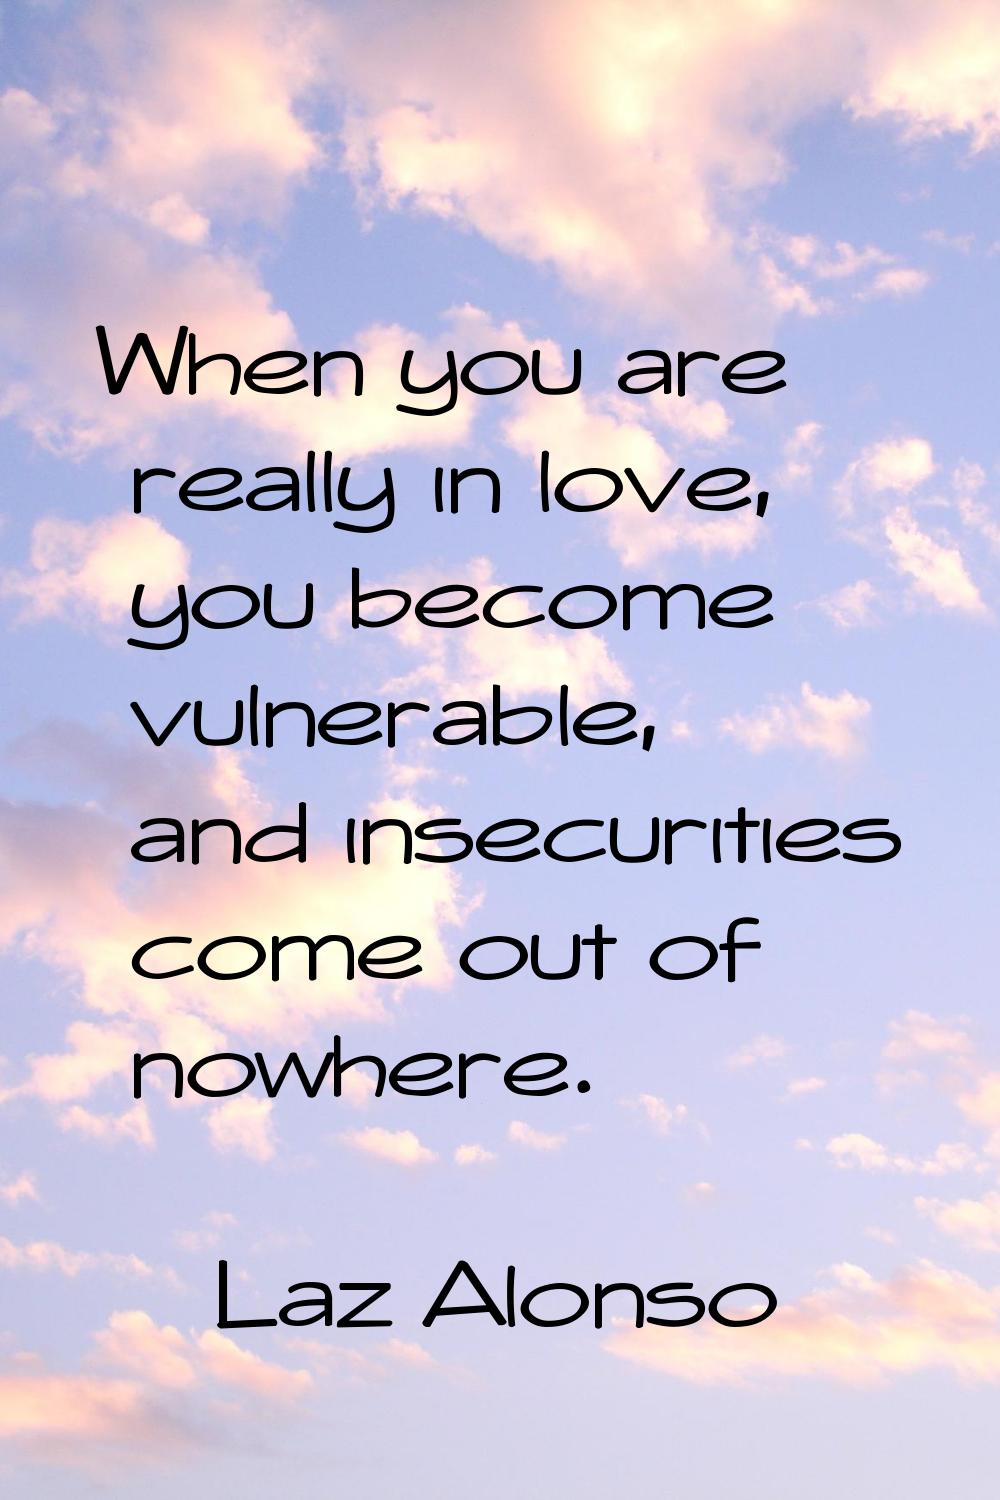 When you are really in love, you become vulnerable, and insecurities come out of nowhere.